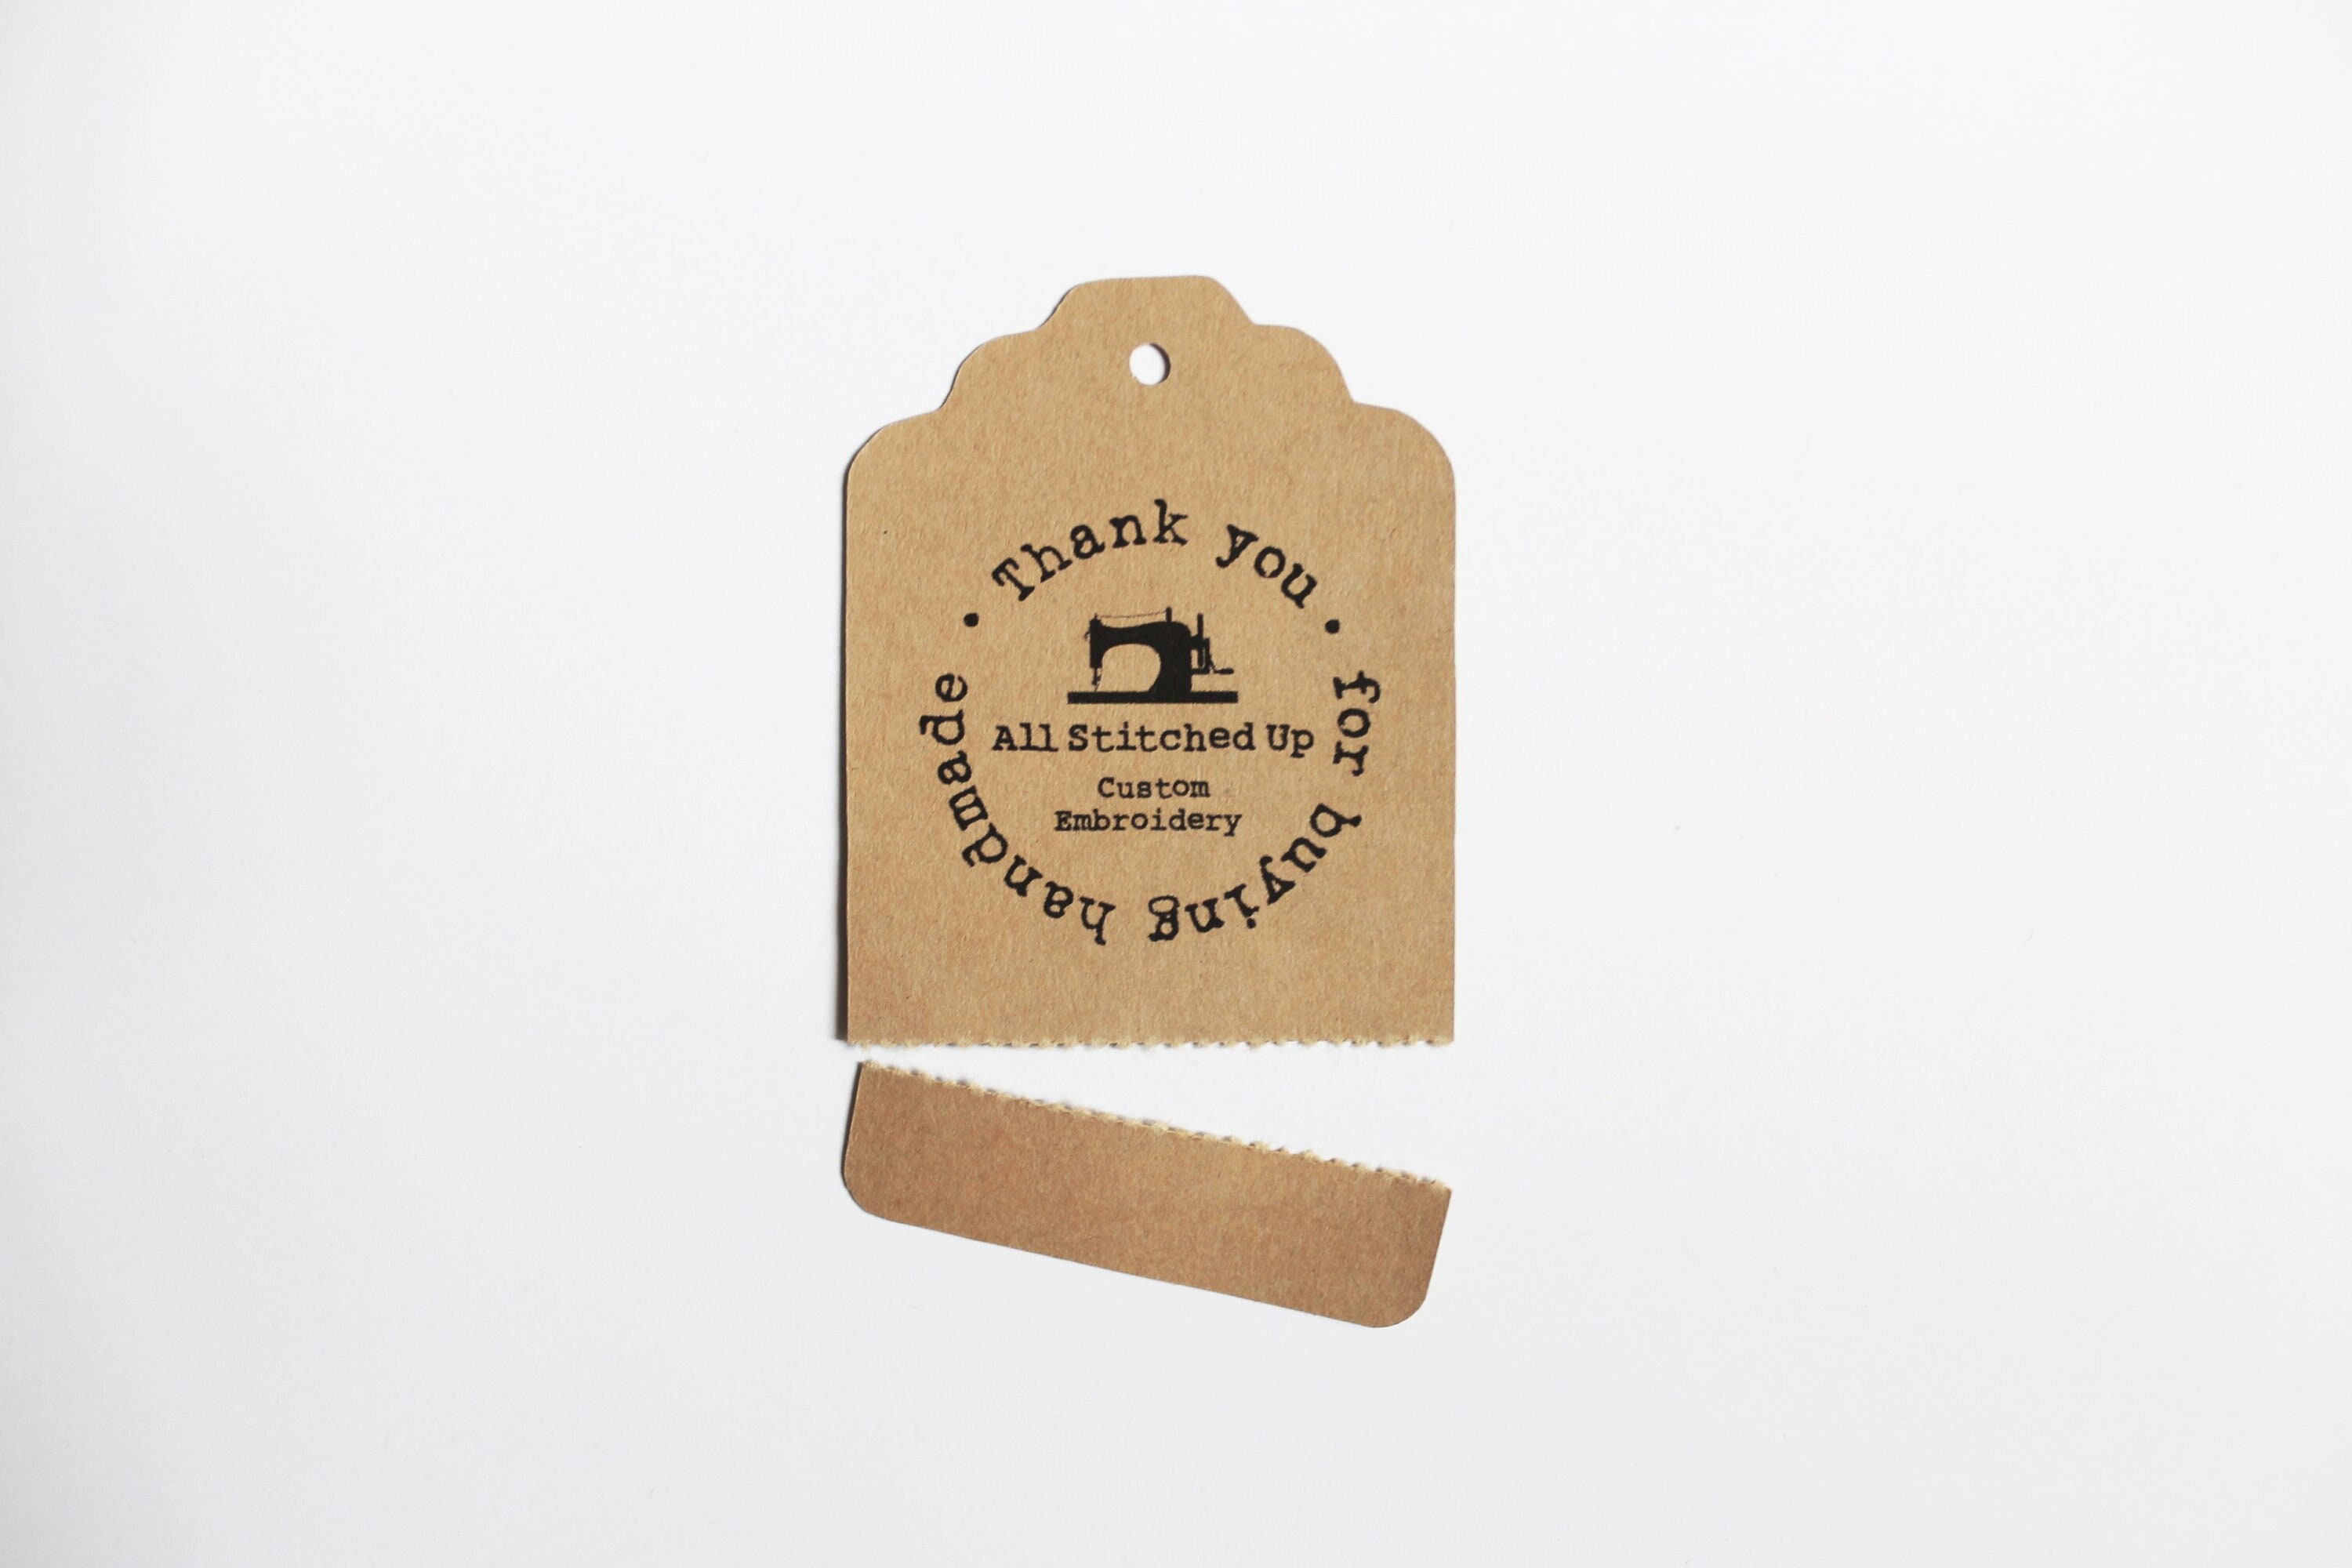 12 Pcs of Merchandise Tags Price Display Stand for Market. Price Signs,  Price Labeling, Price Tags, or Retail Tags. Wooden Tags.size90x50 